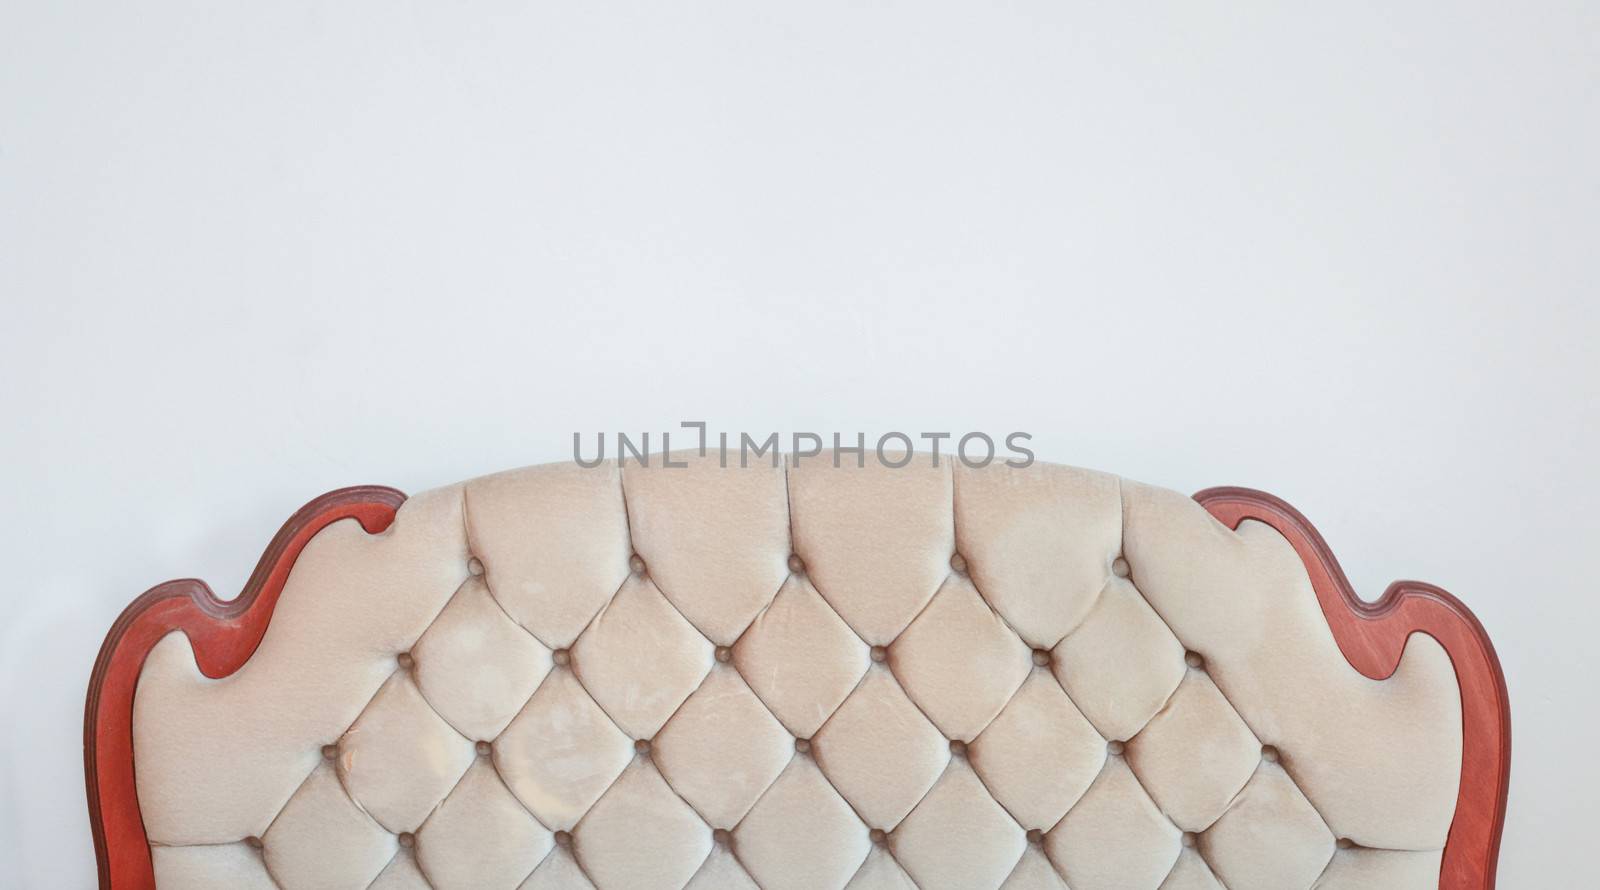 A retro bedstead against a white wall